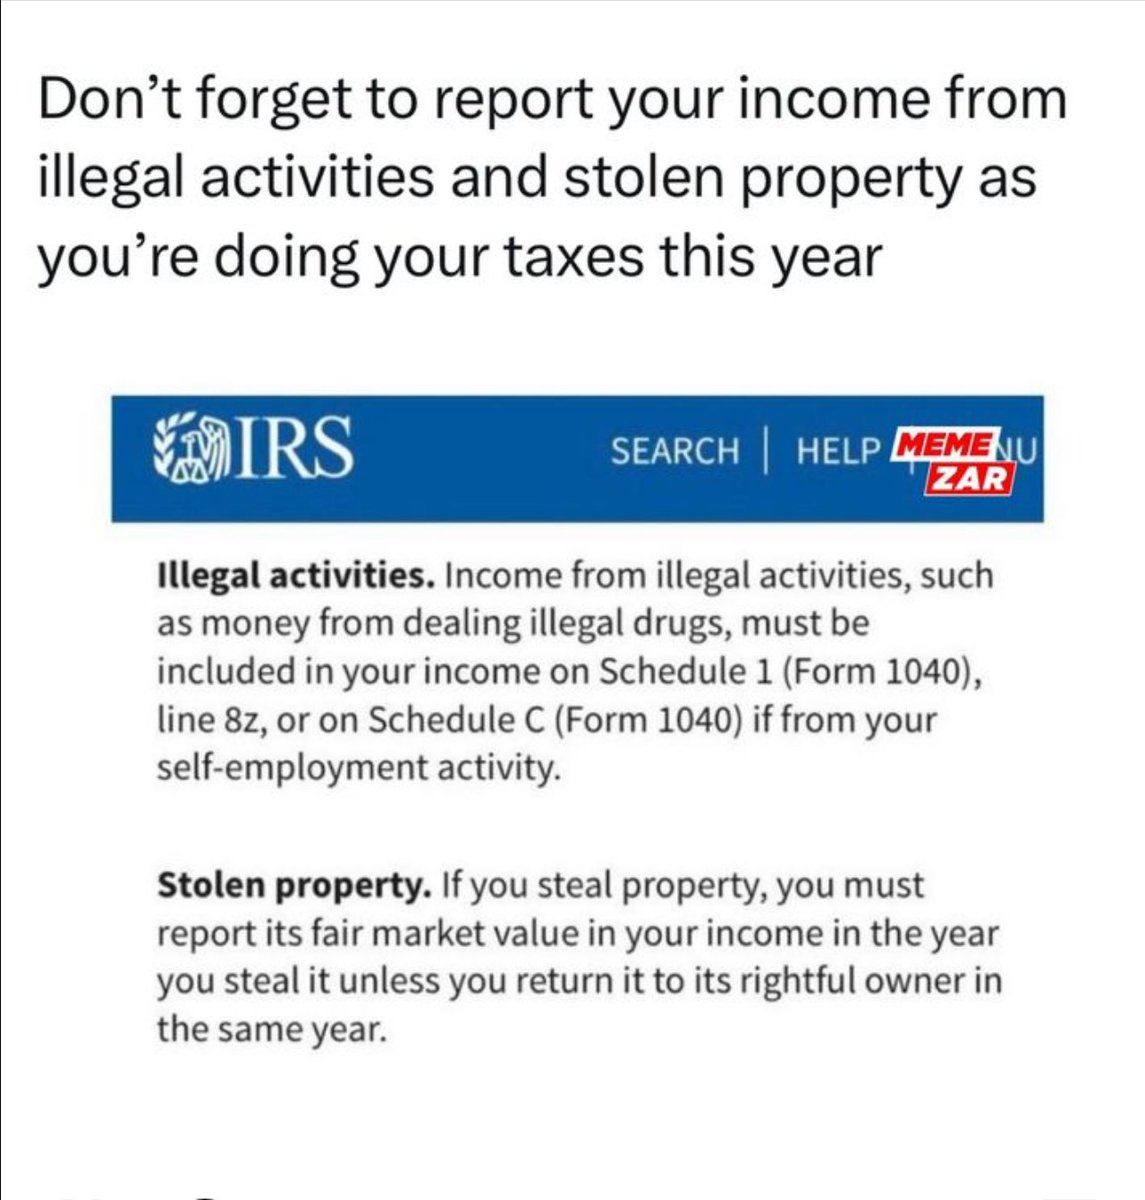 Hey @jenniferpierson , make sure you report that stolen income from your scams since the IRS doesn't treat tax evaders very nicely. #ScamArtist #PieceOfShitHuman